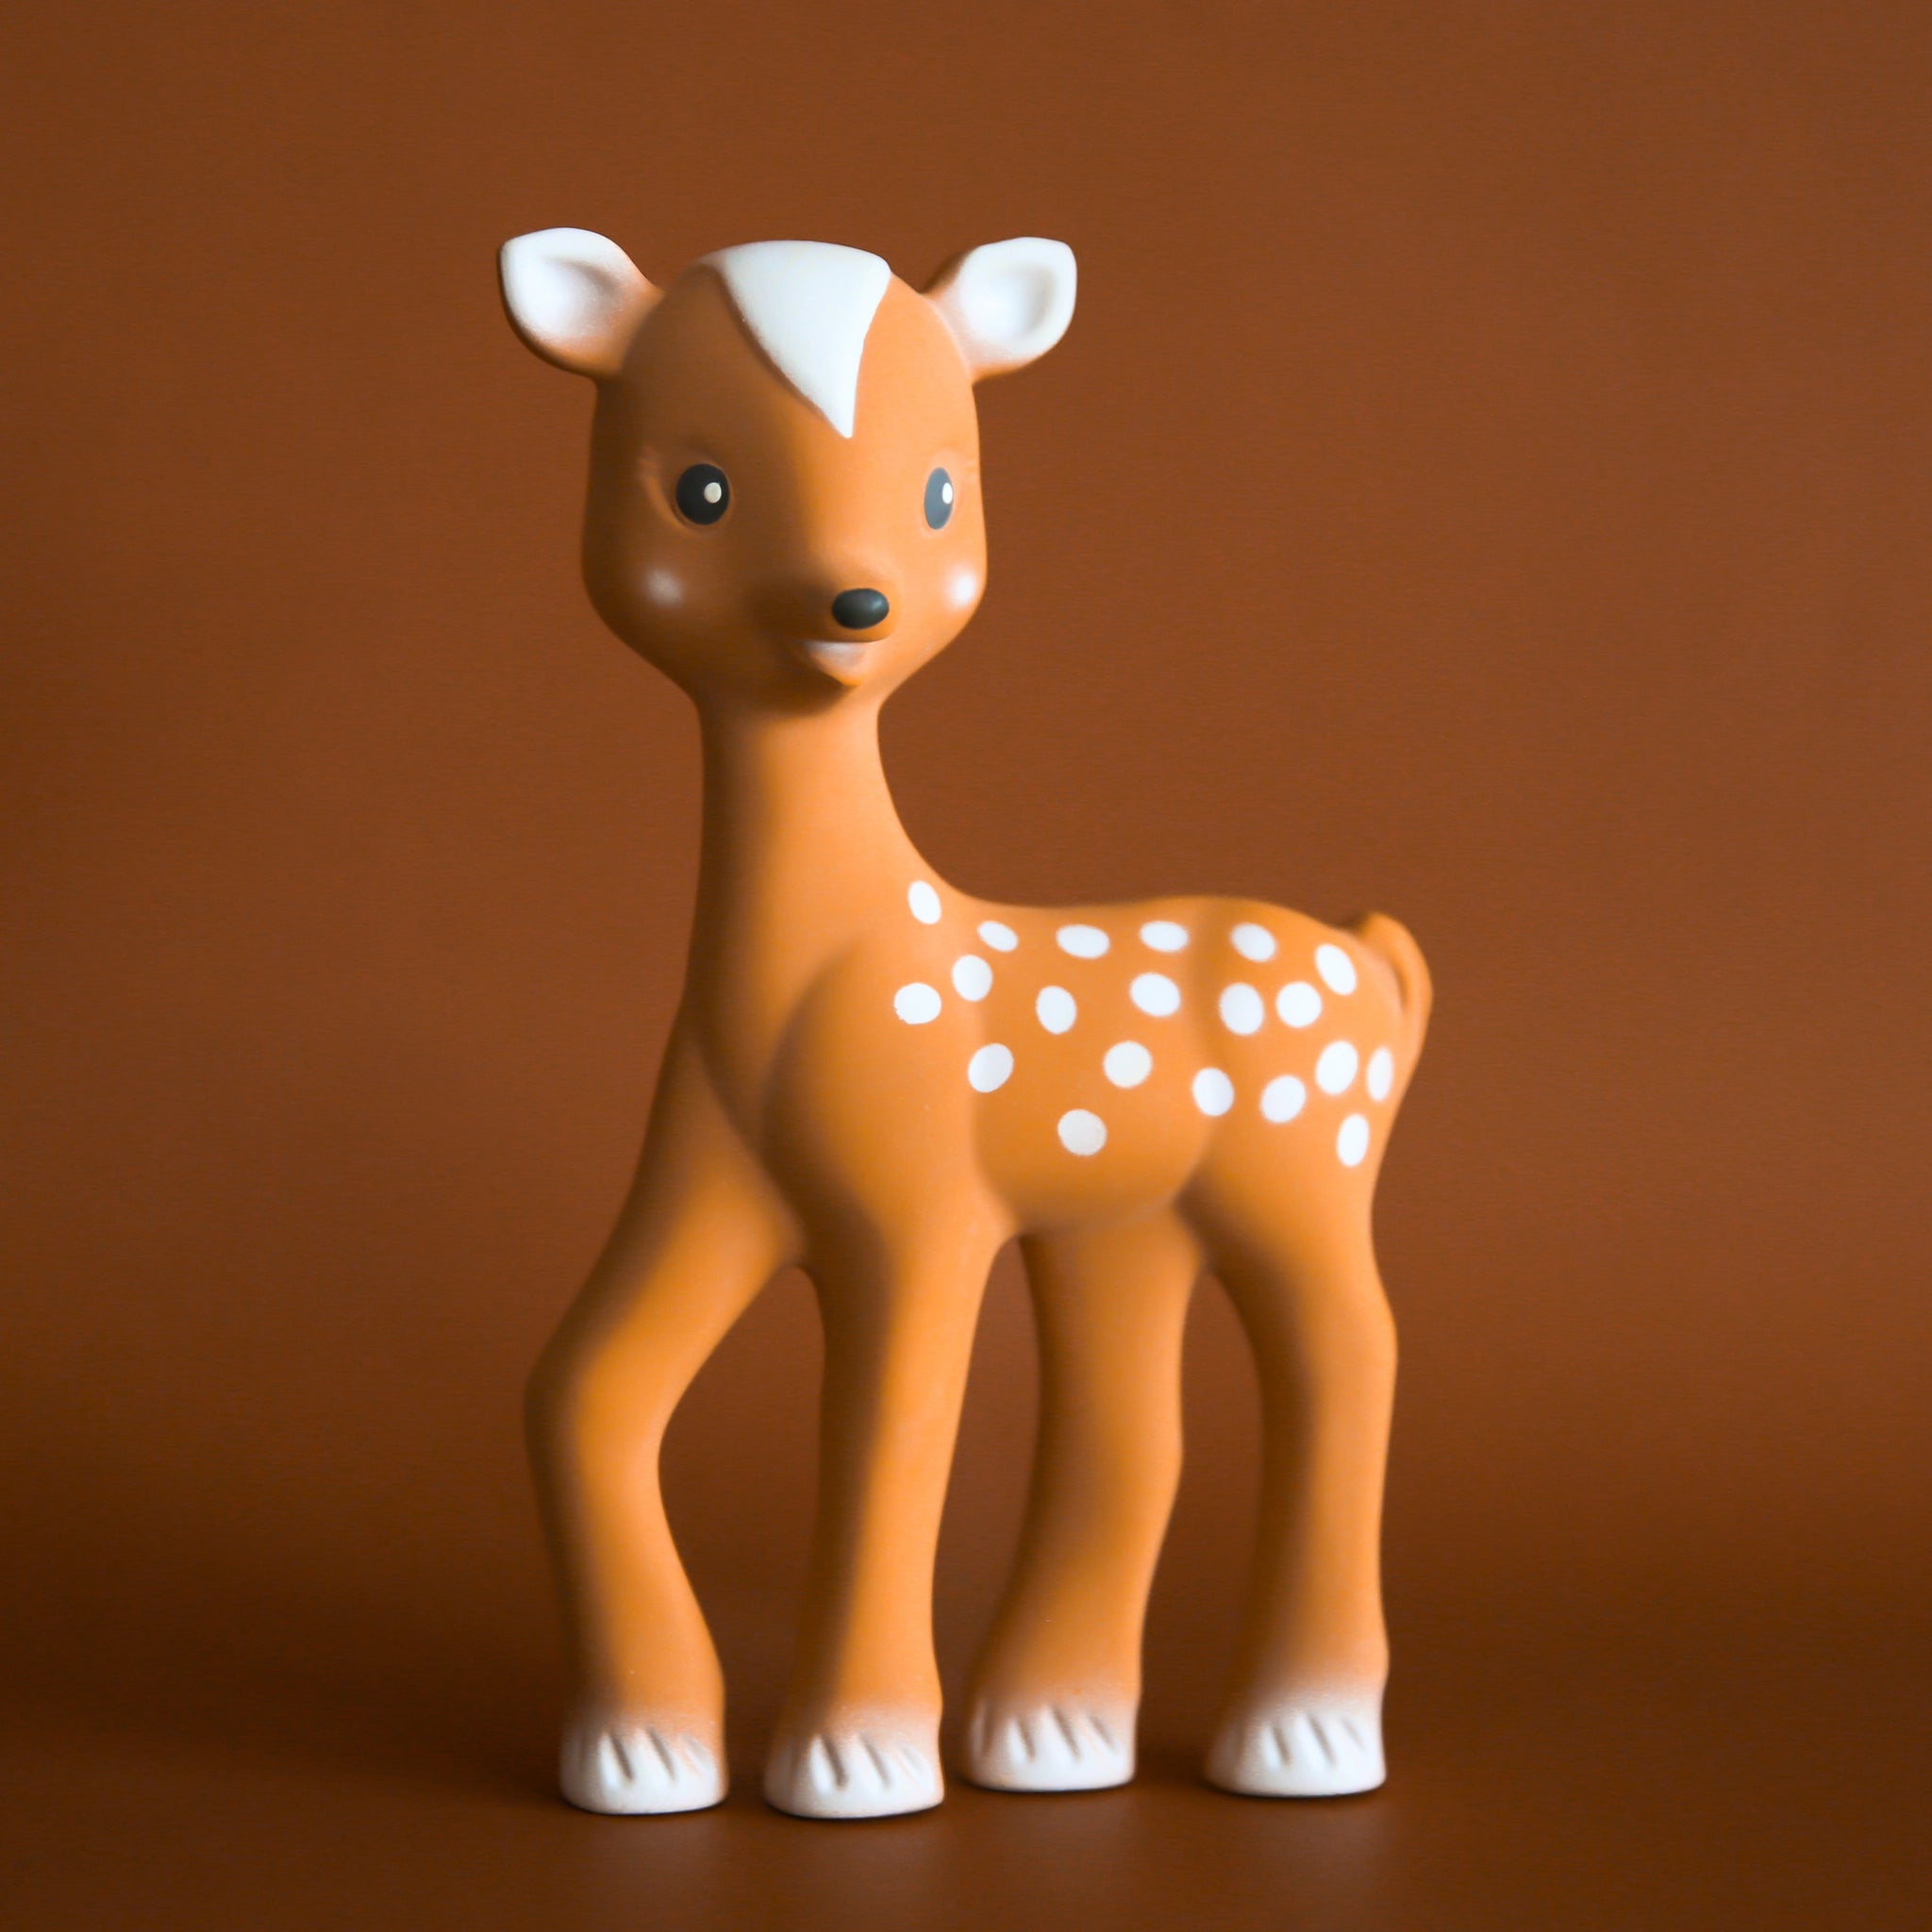 On a brown background is a fawn children's toy with cream accents.